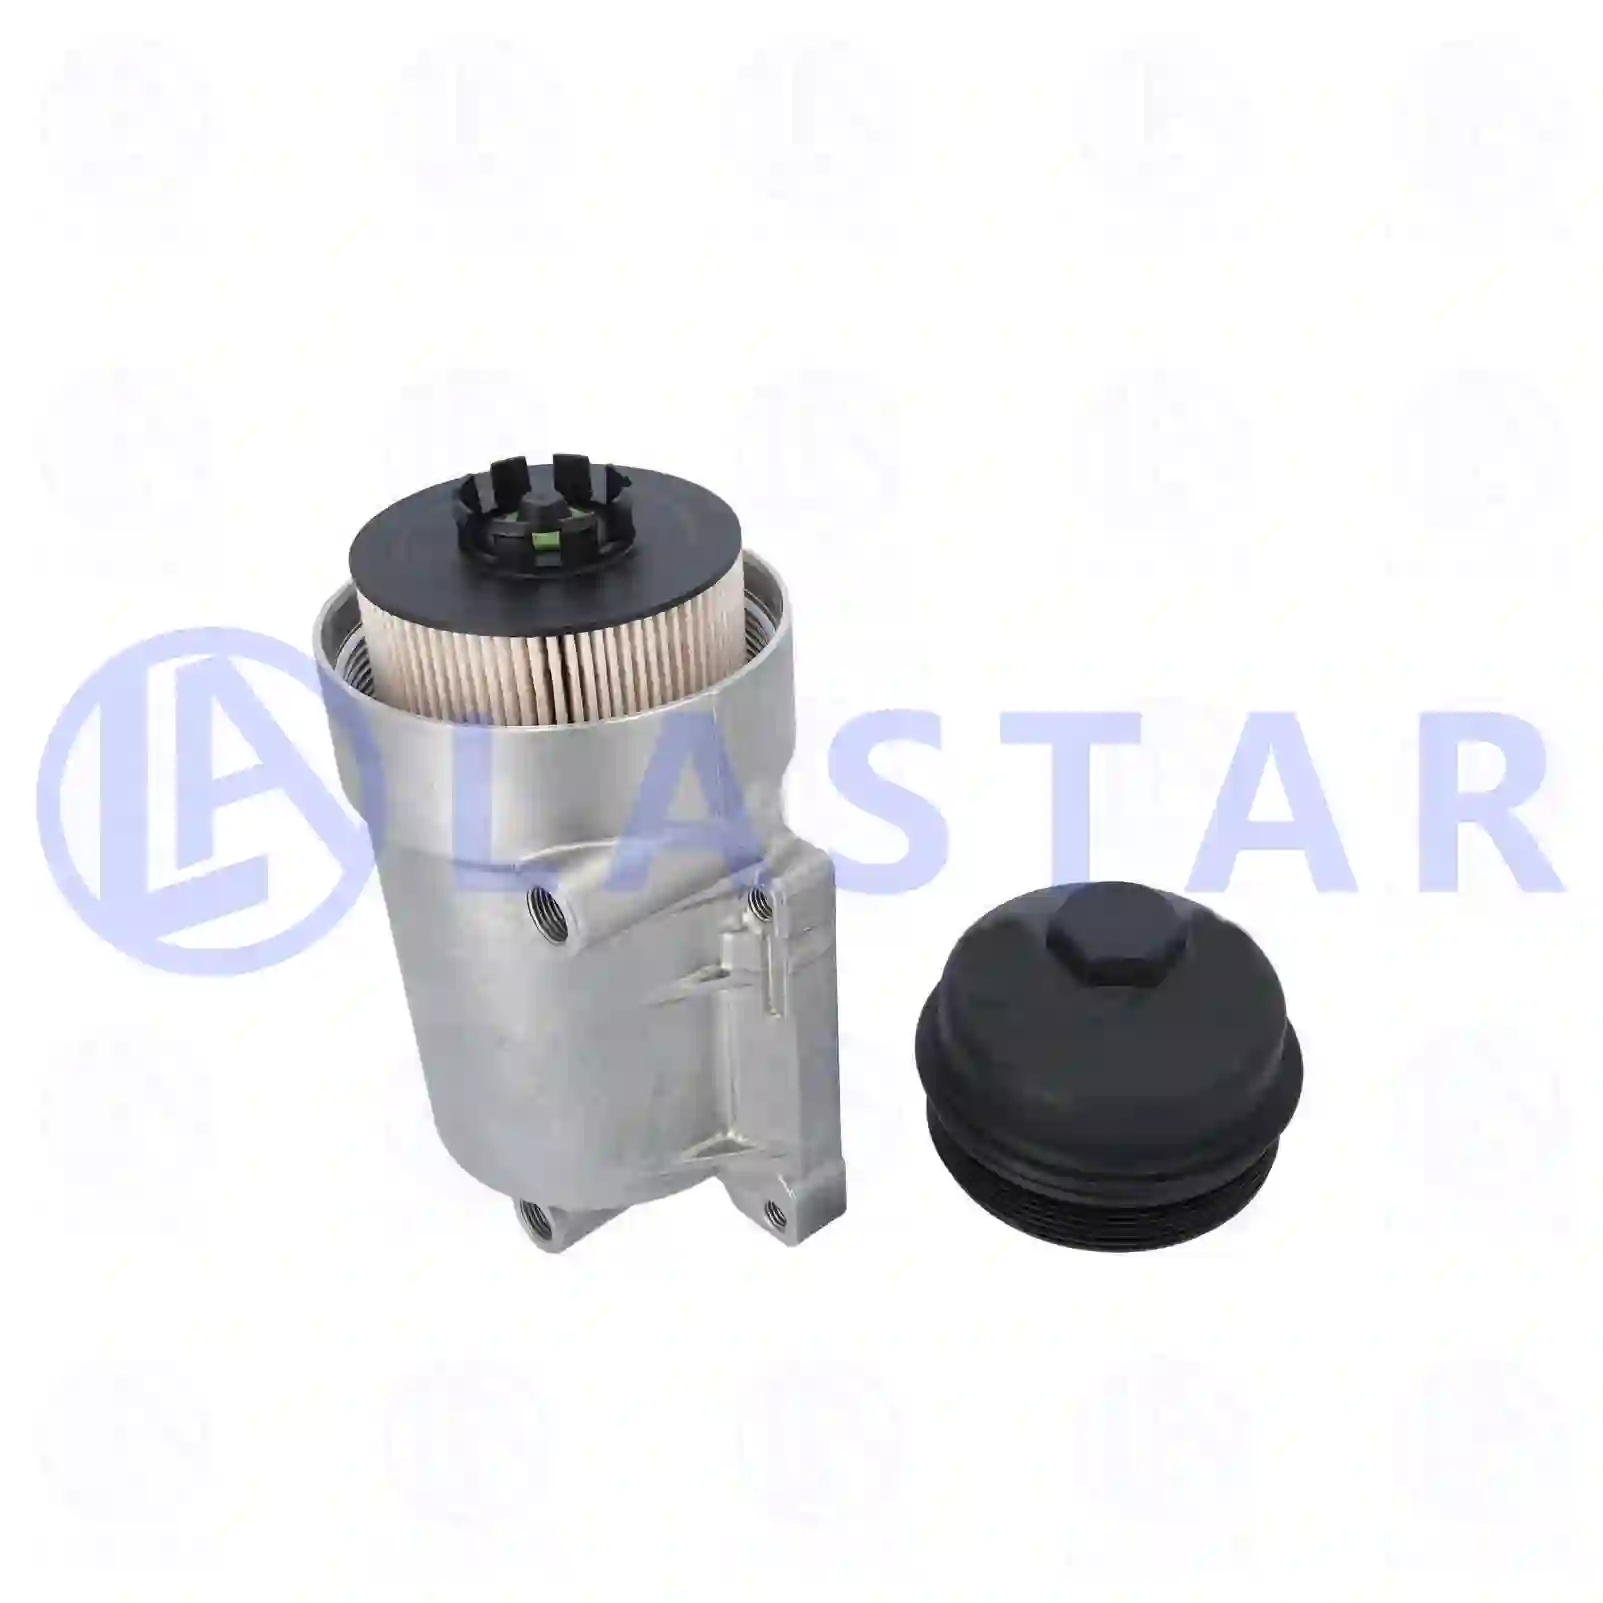 Fuel filter, complete, with filter, 77723754, 5410900452, 54109 ||  77723754 Lastar Spare Part | Truck Spare Parts, Auotomotive Spare Parts Fuel filter, complete, with filter, 77723754, 5410900452, 54109 ||  77723754 Lastar Spare Part | Truck Spare Parts, Auotomotive Spare Parts